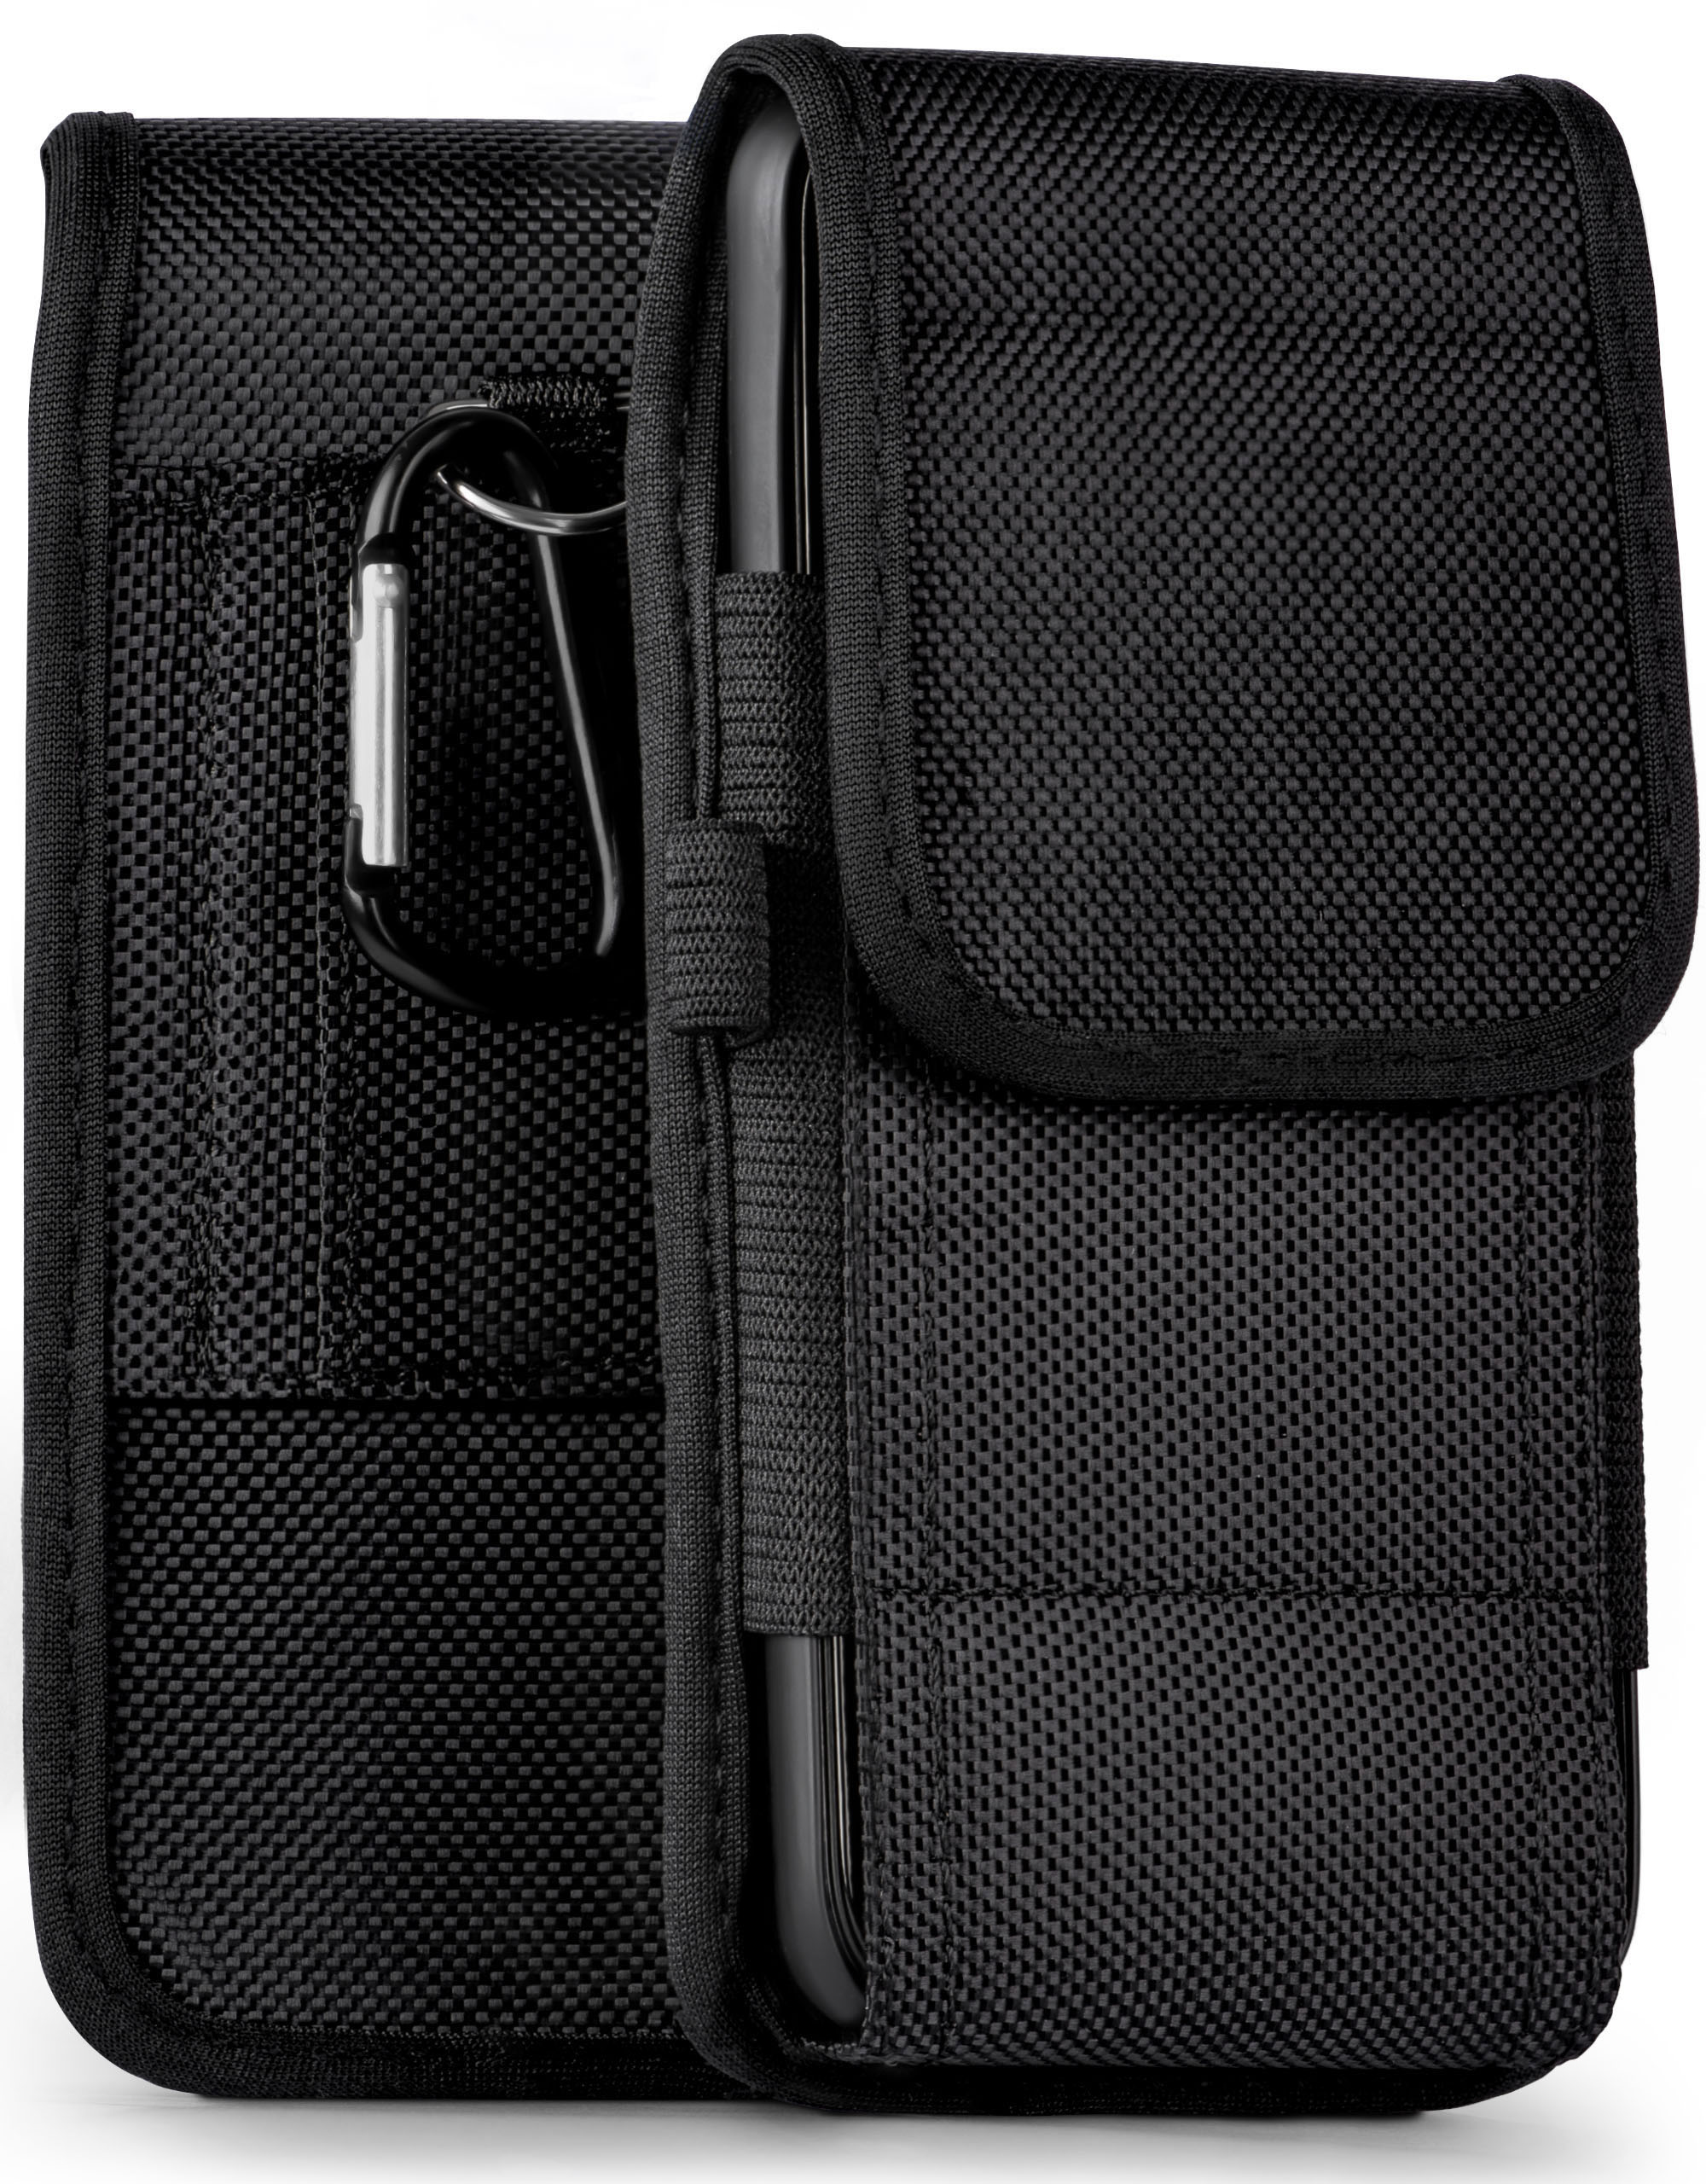 Case, Trail Apple, MOEX 11, iPhone Holster, Agility